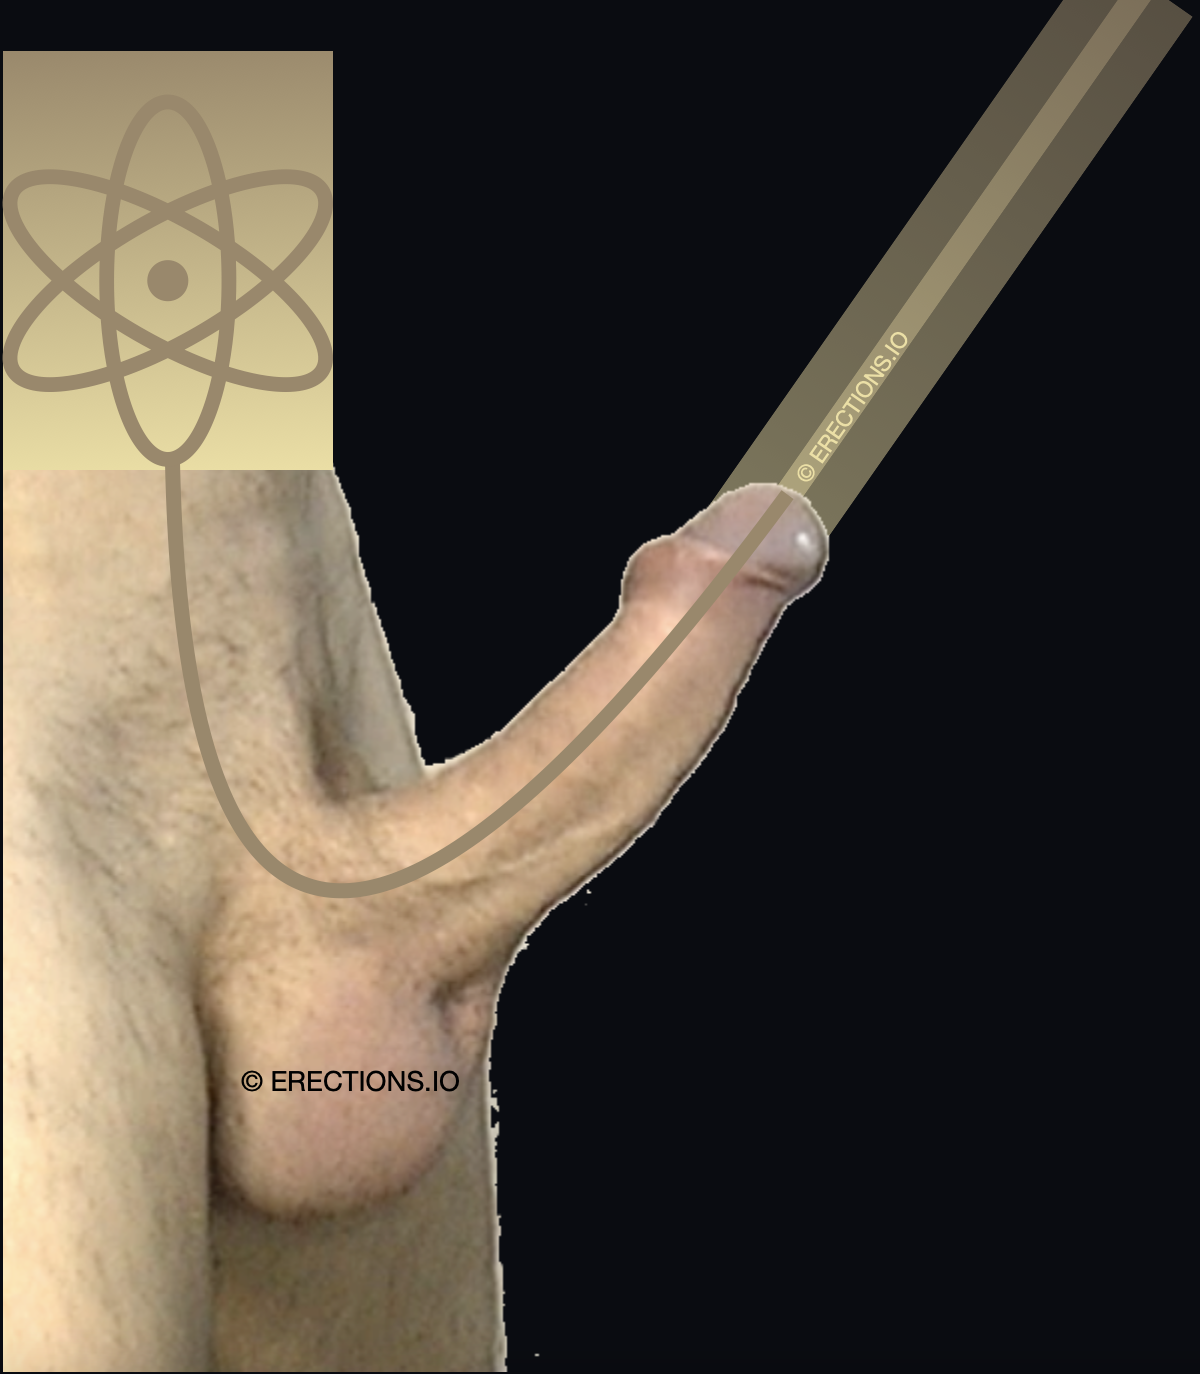 An erect penis sticking out from body with overlay of energy flow to signify erection control